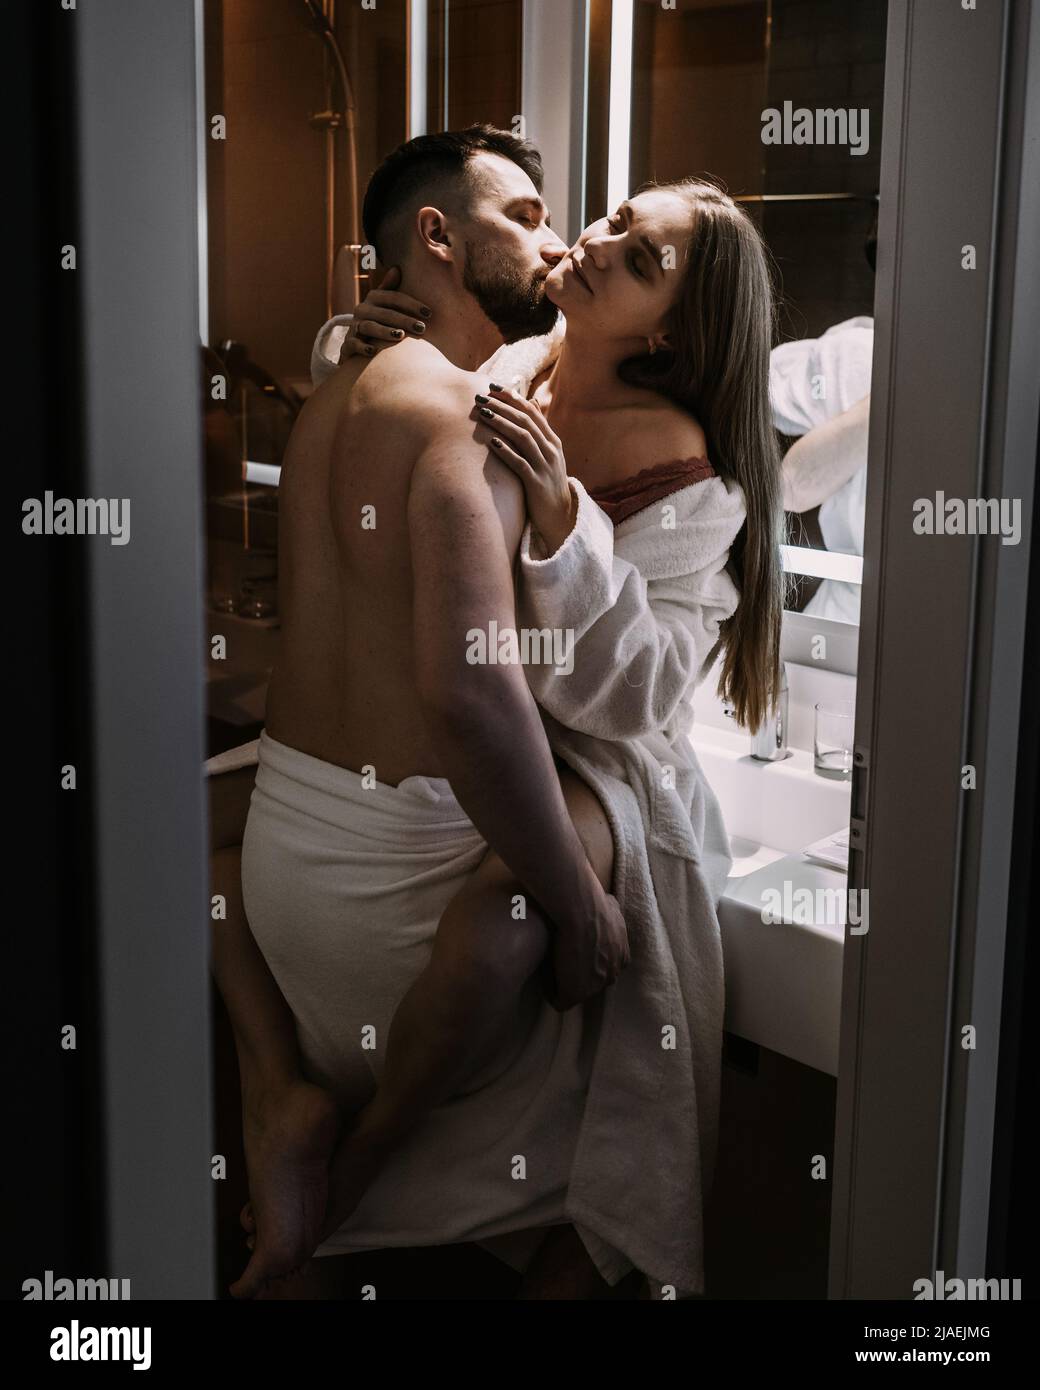 Romantic couple cuddles and kisses at mirror in bathroom Stock Photo